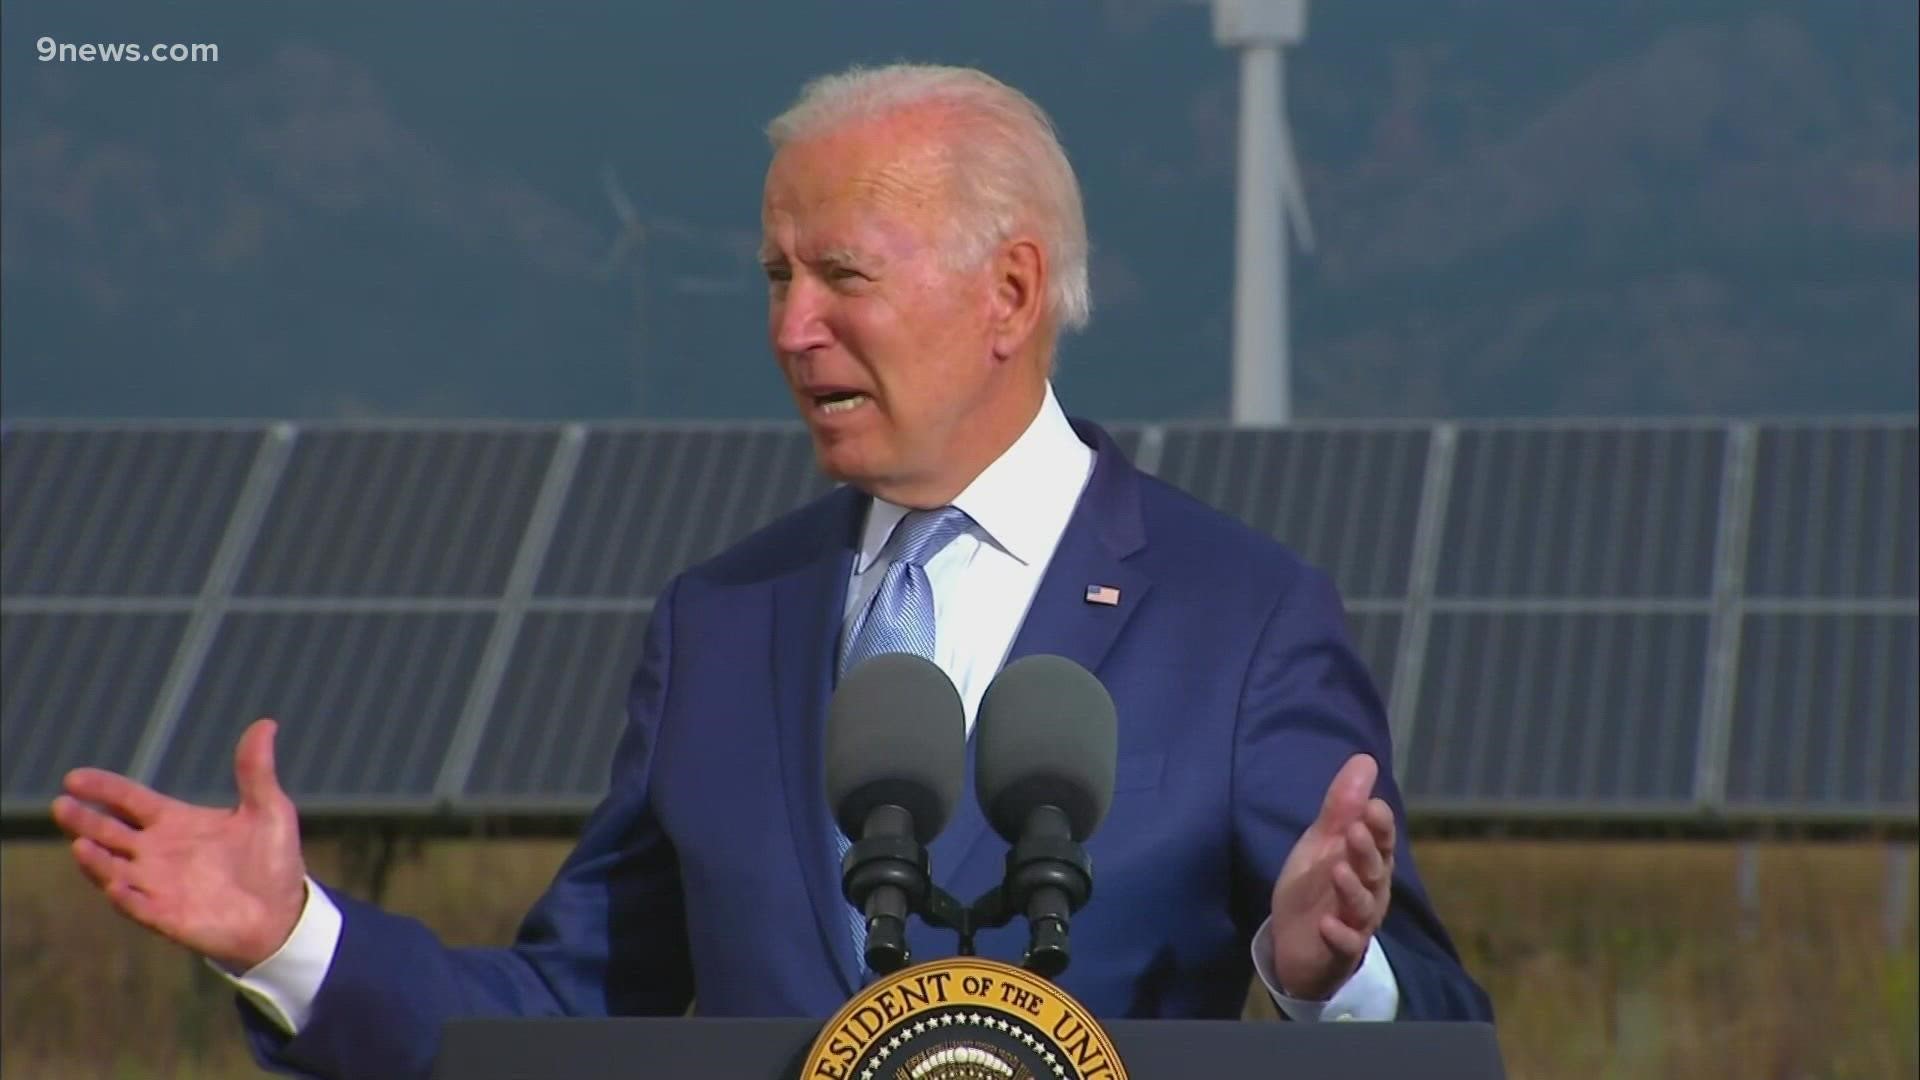 President Biden toured NREL in Golden and then touted his plan to create jobs while tackling the climate crisis.